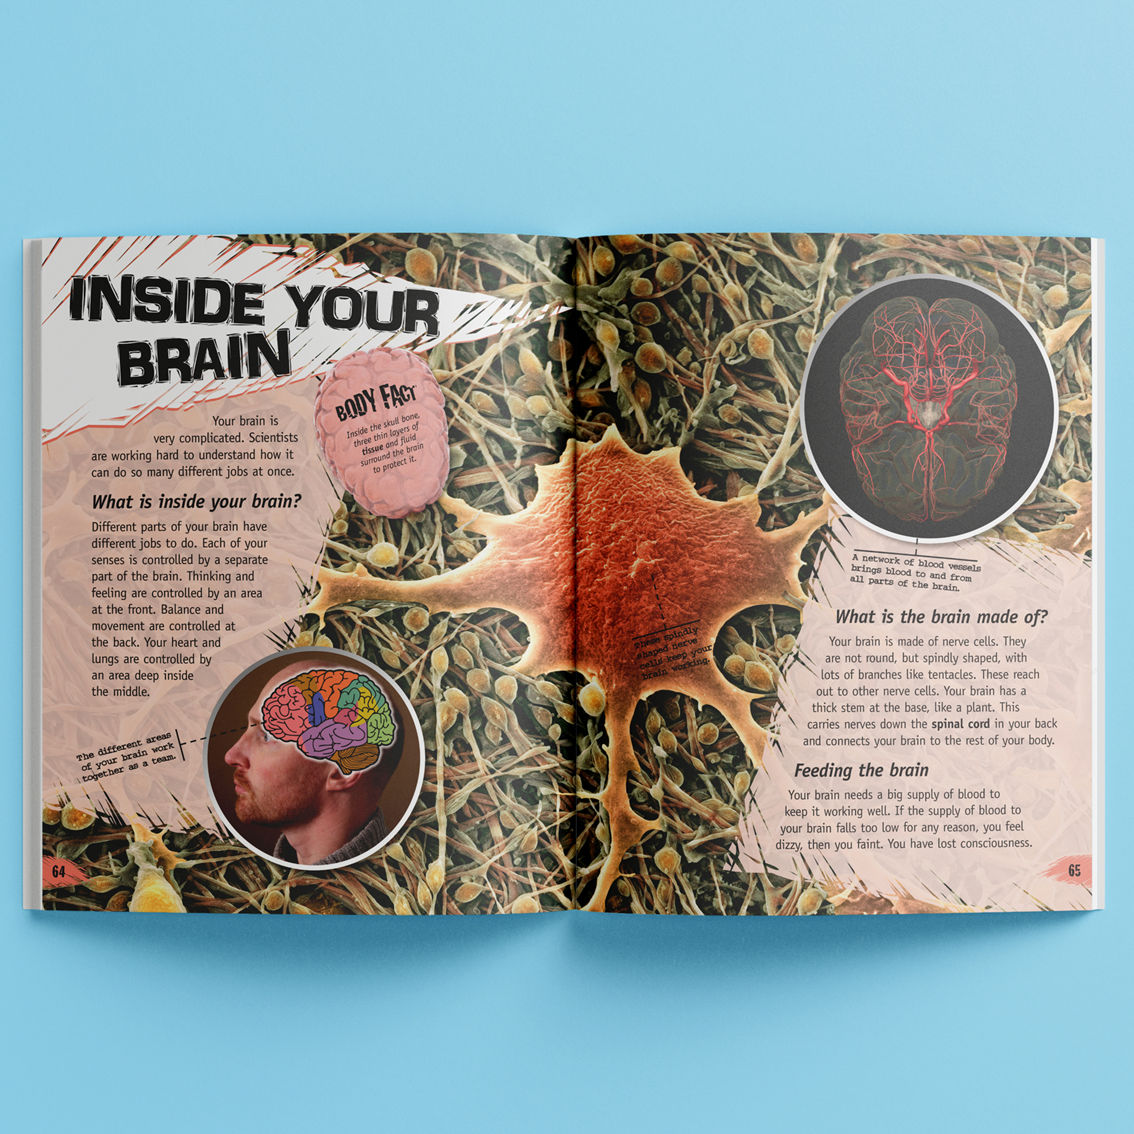 Incredible But True: The Human Body Hardcover Book - Image 4 of 5